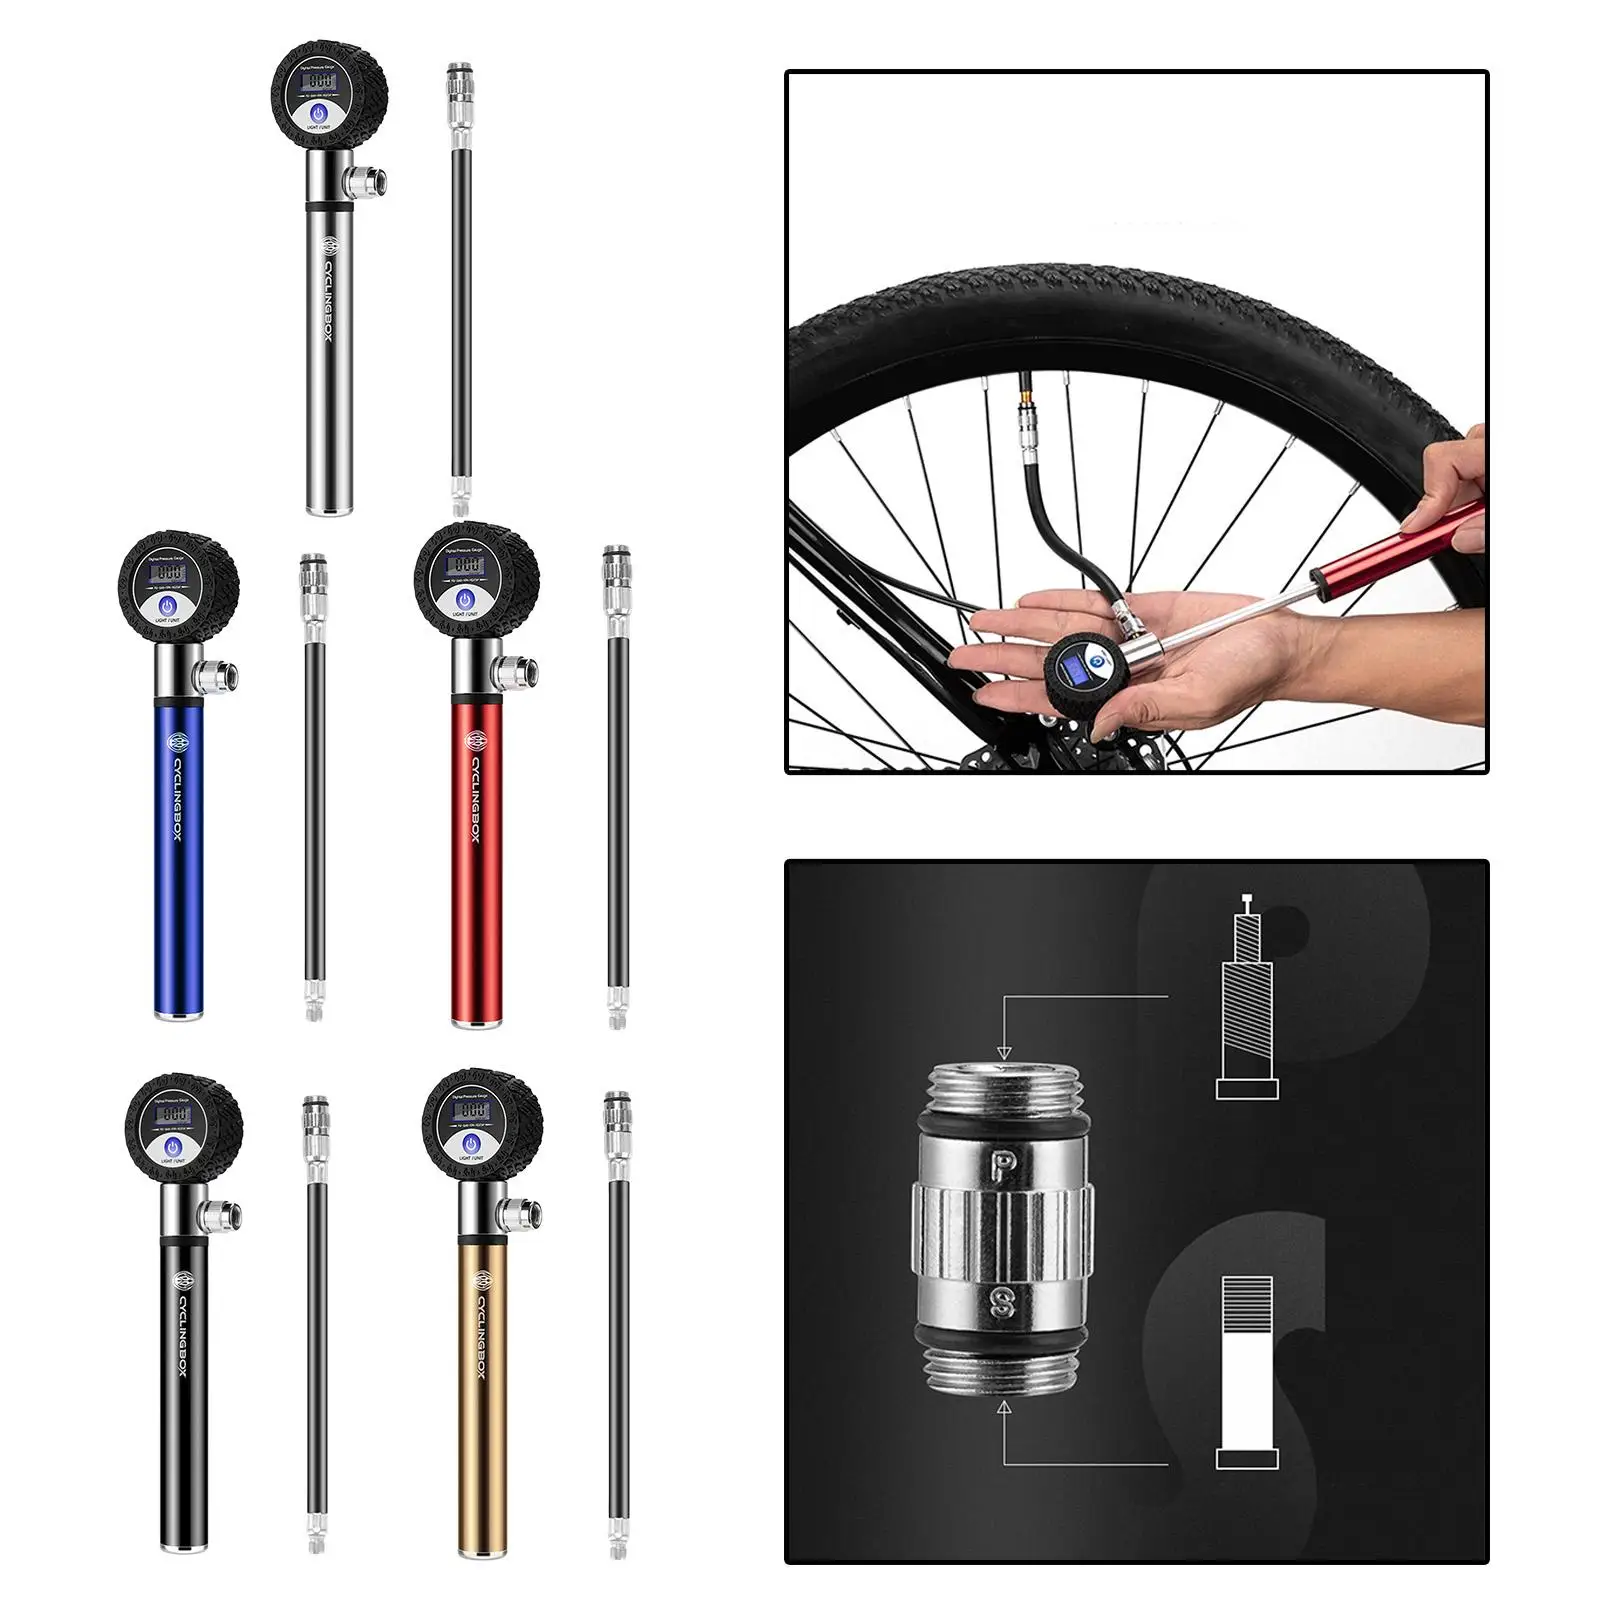 Portable 120 PSI Inflator with Pressure Gauge for BMX